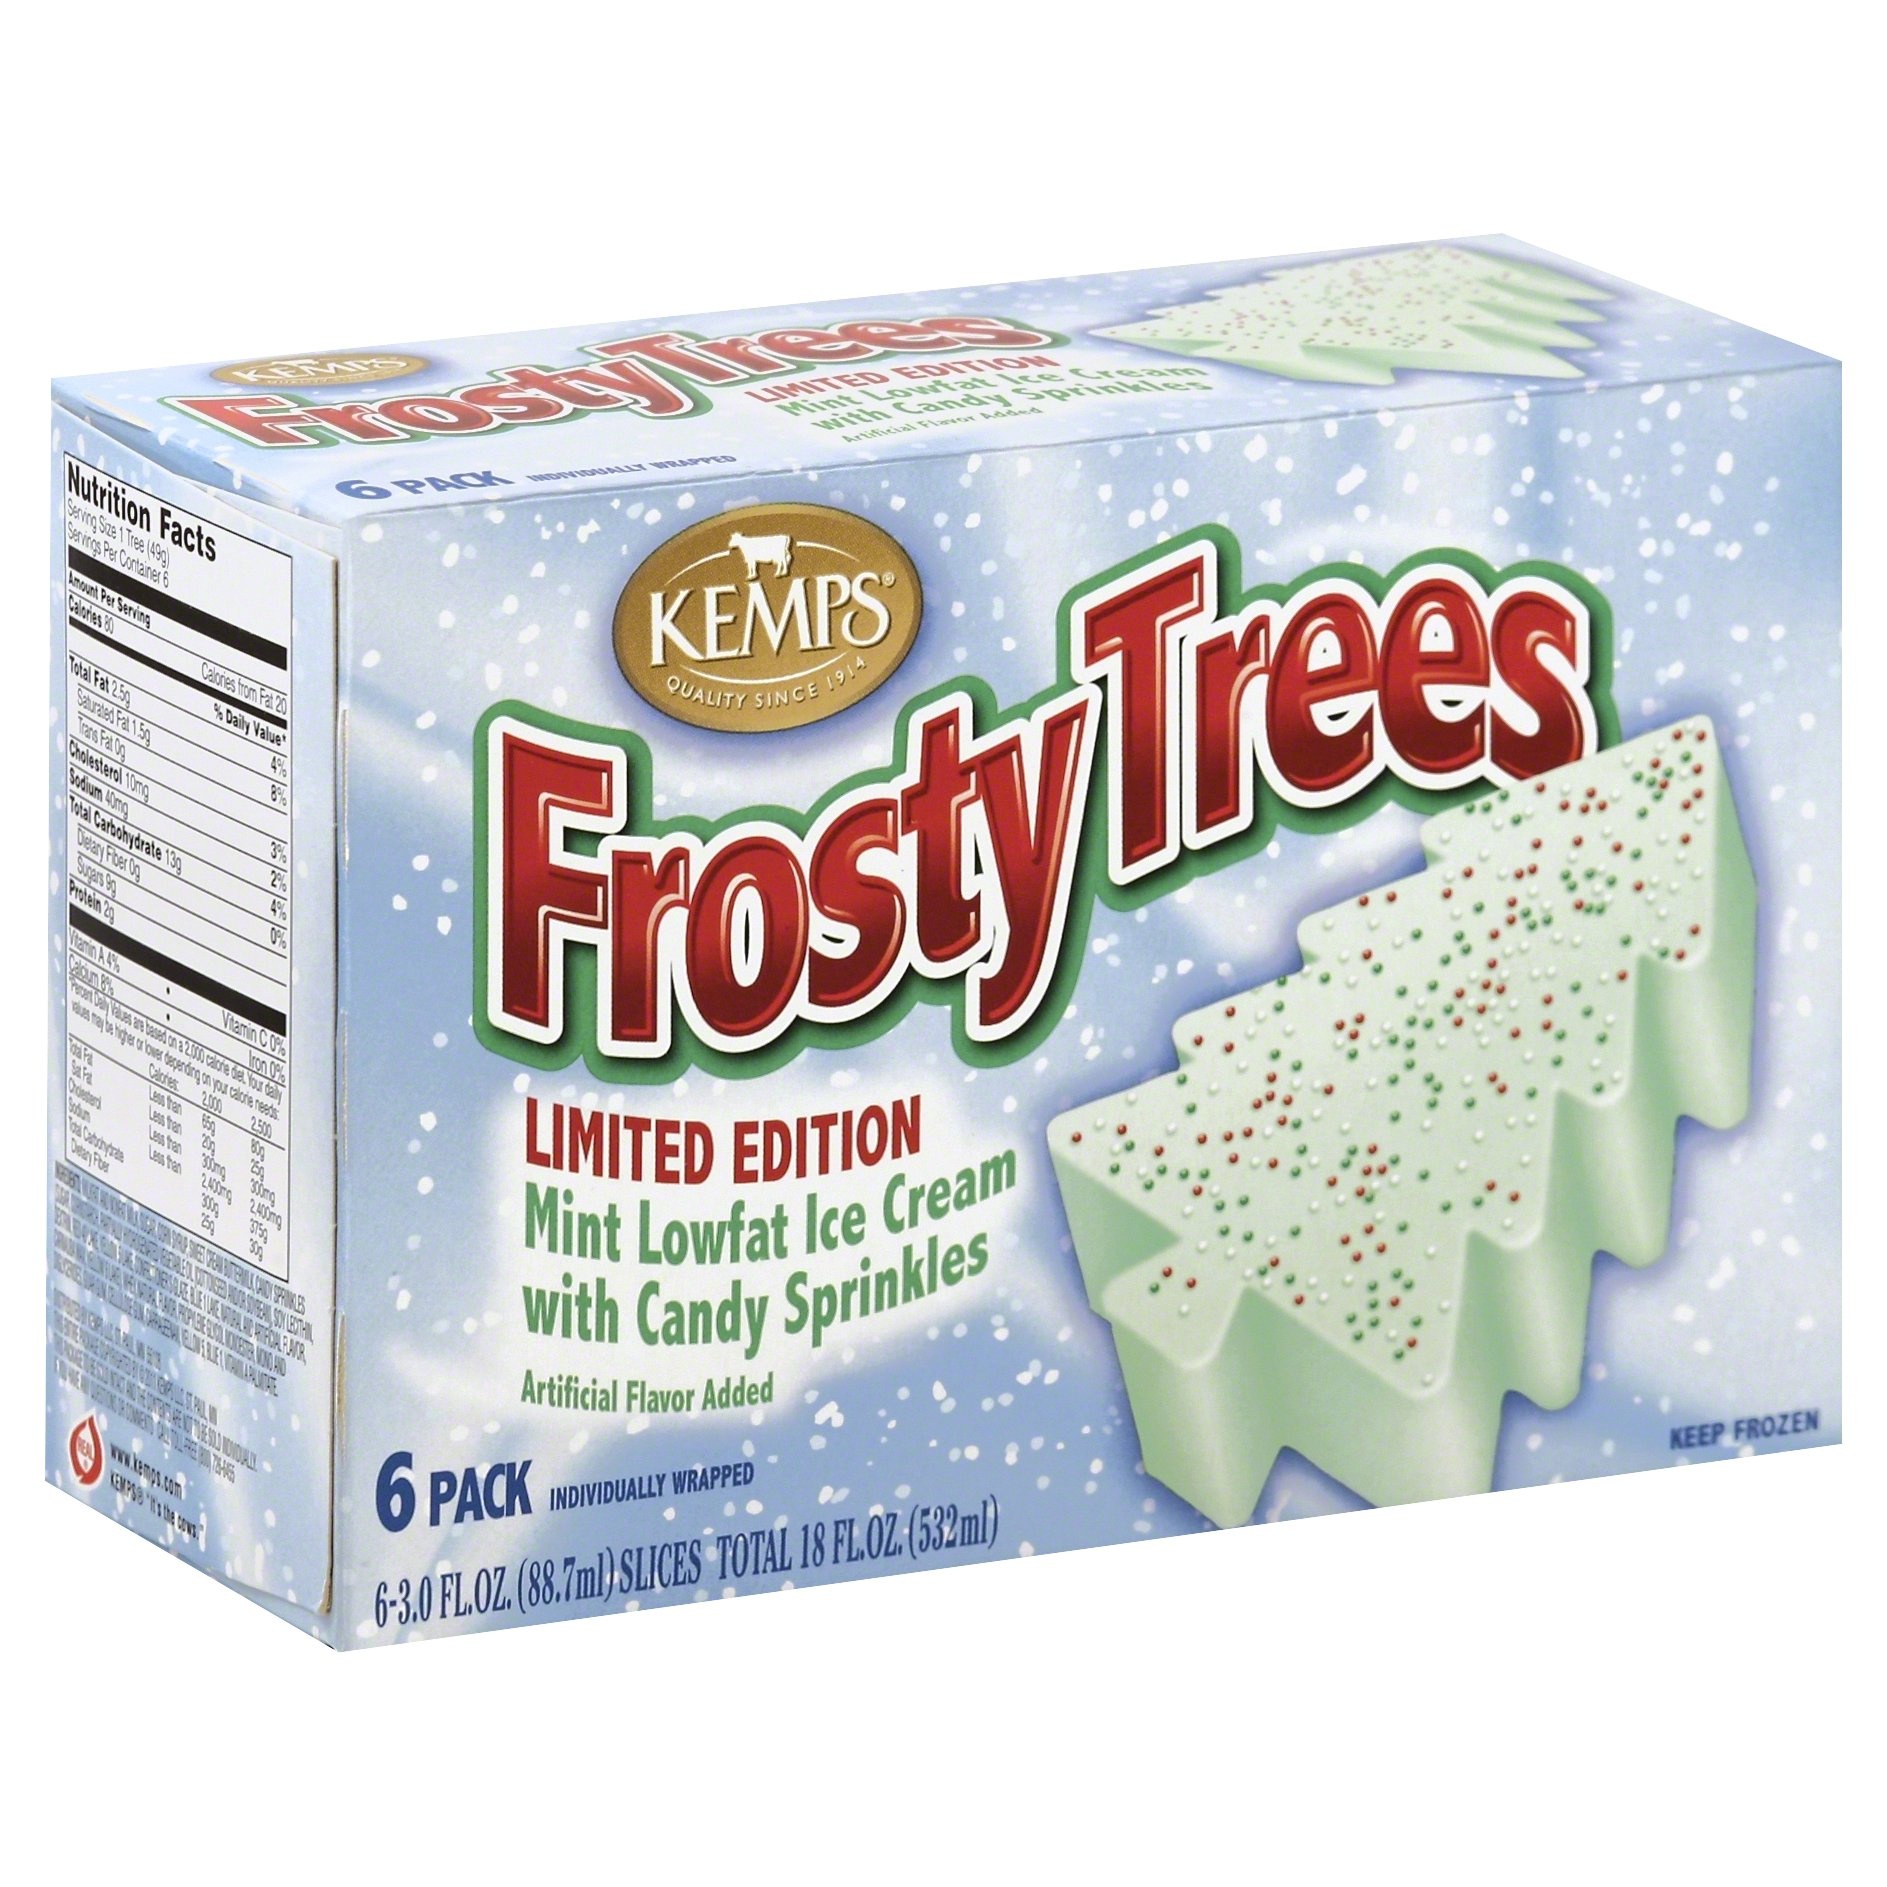 slide 1 of 8, Kemps Frosty Trees Mint Lowfat Ice Cream With Candy Sprinkles Slices, 6 ct; 3 fl oz